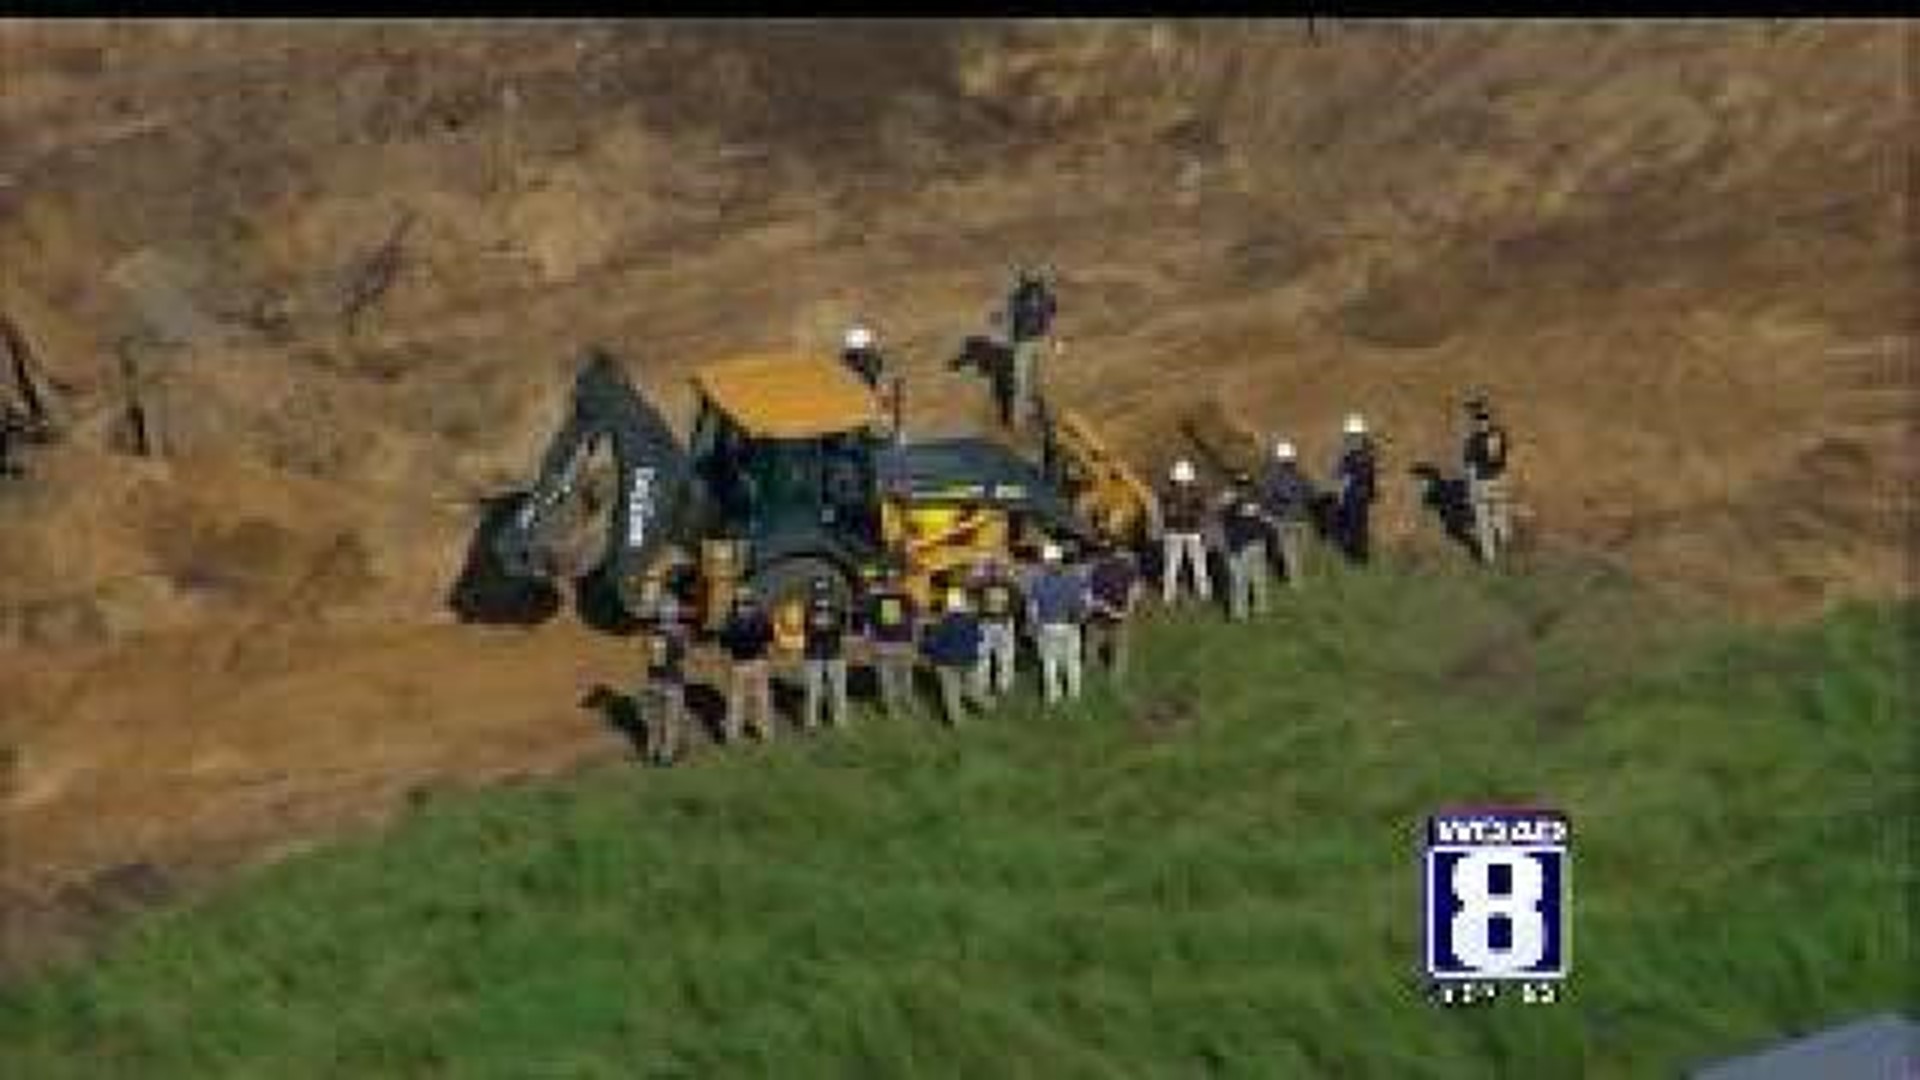 Search for Jimmy Hoffa continues after latest attempt